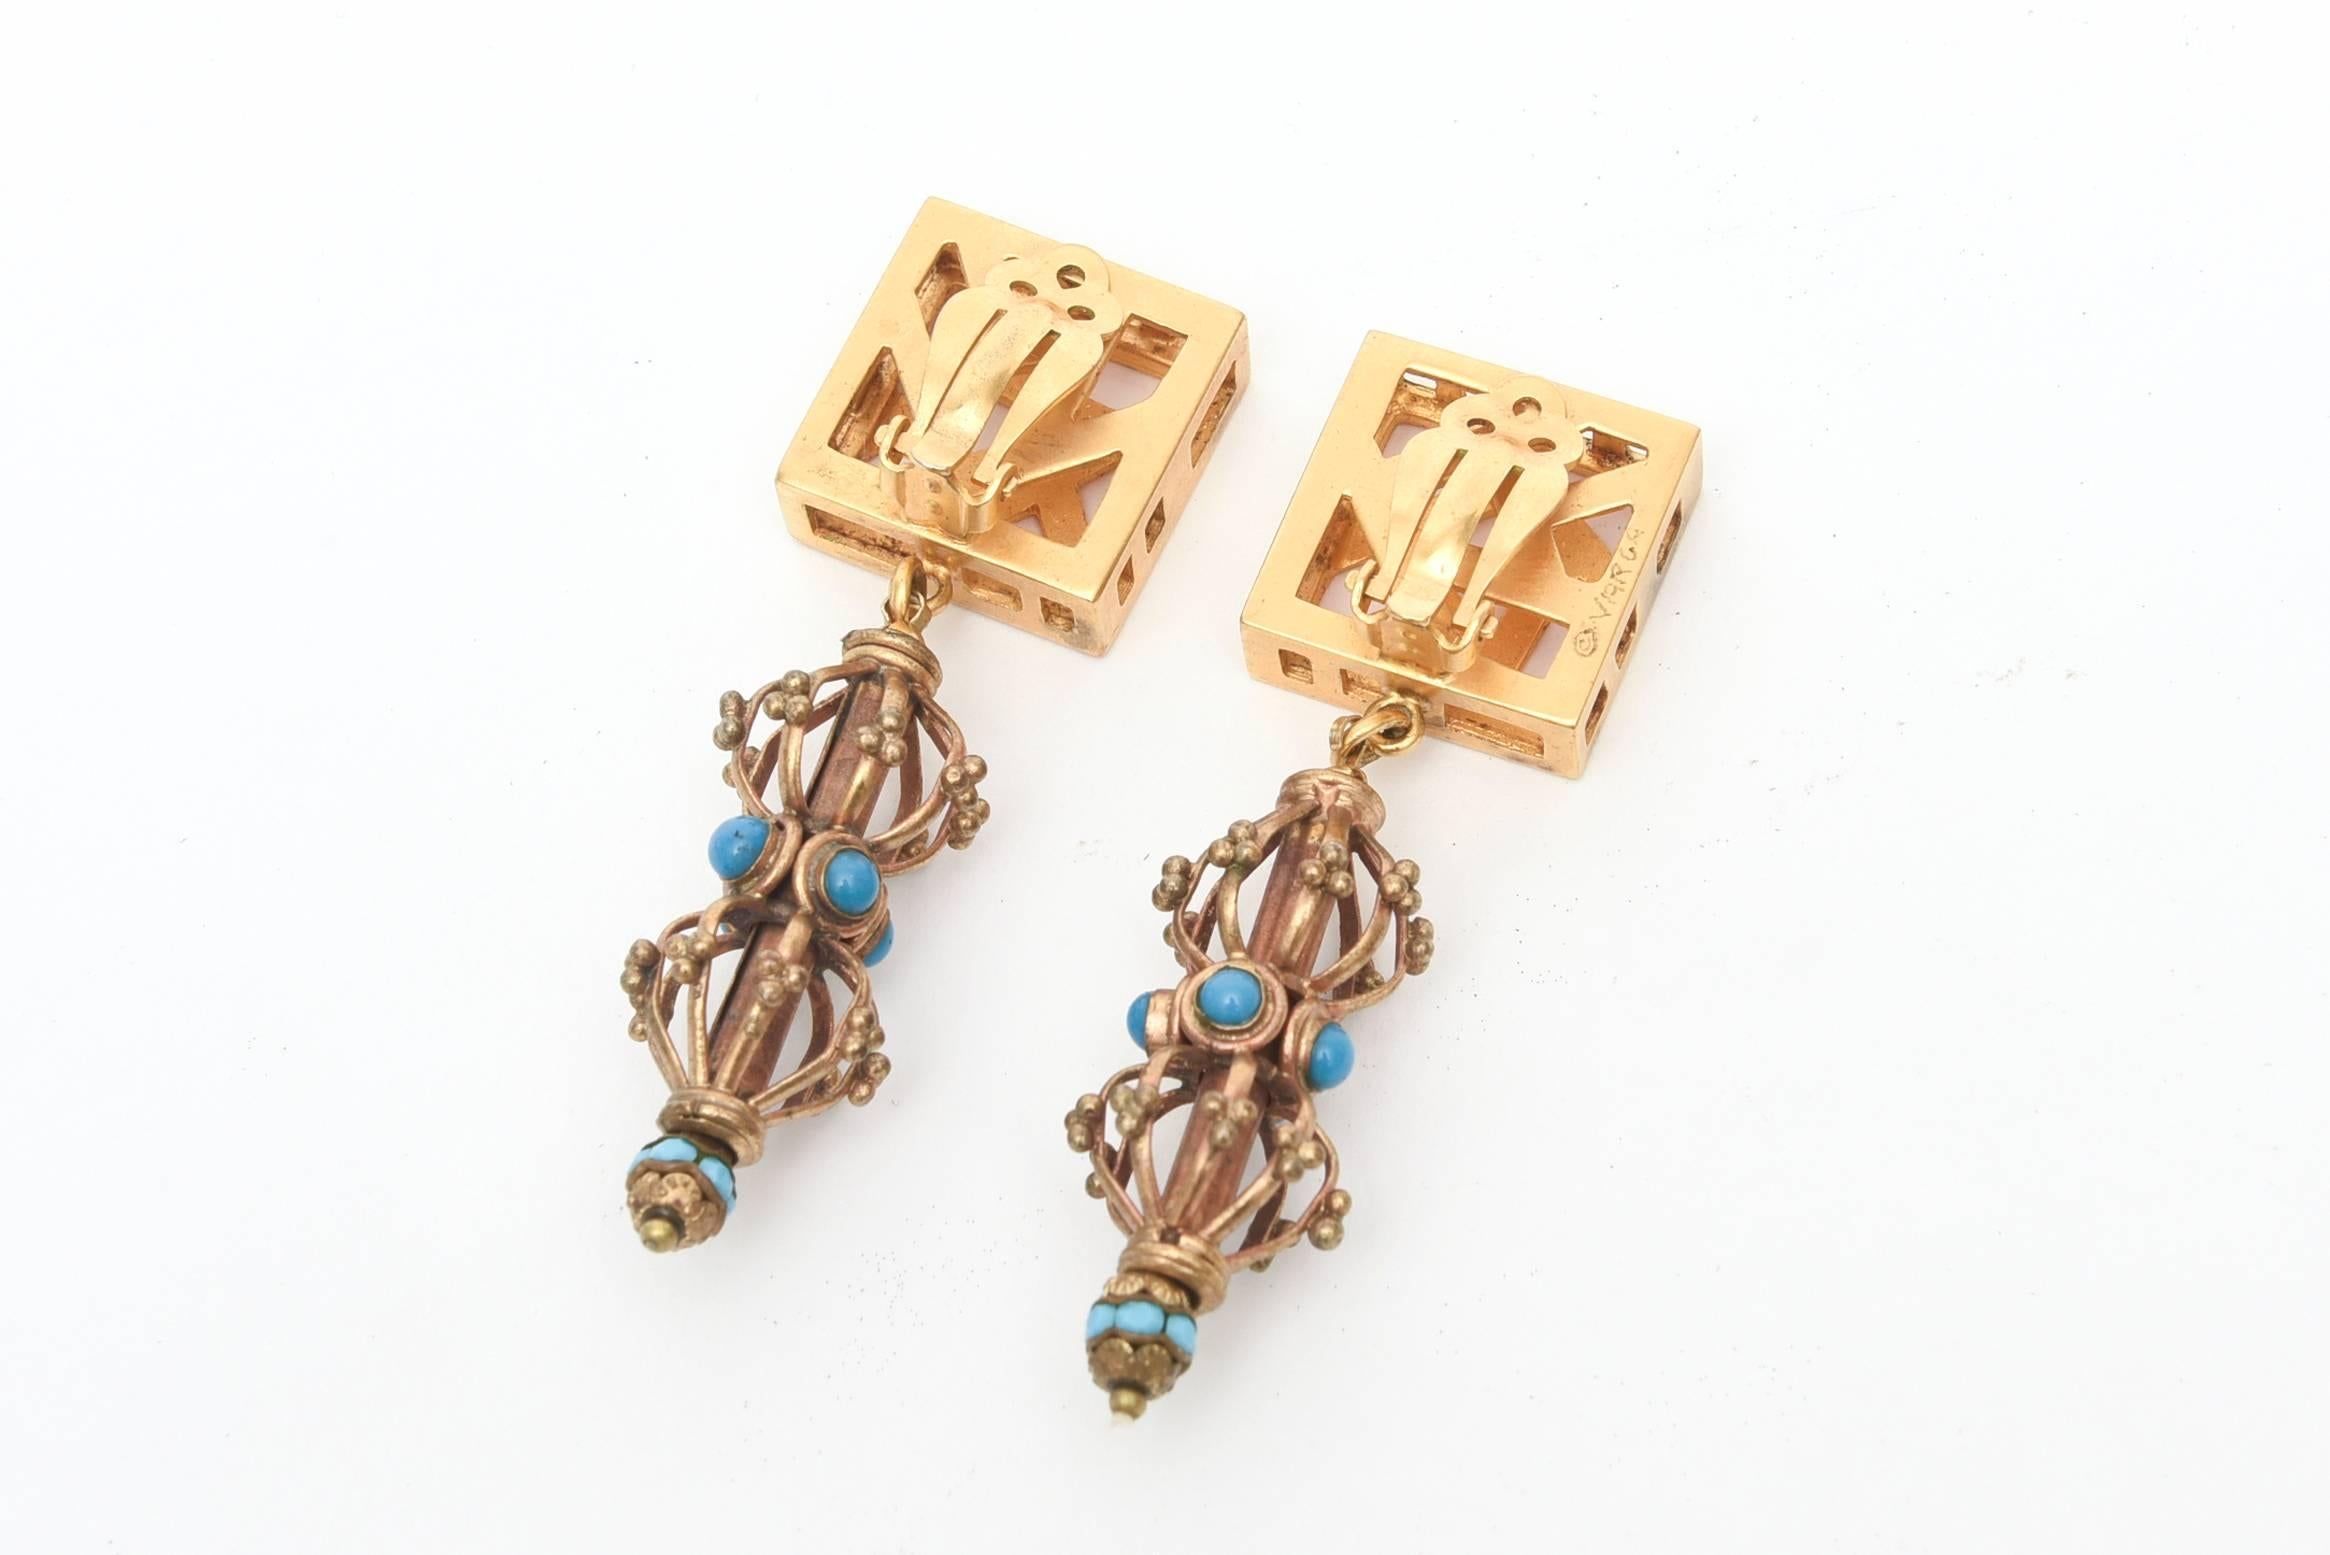 These unusual pair of clip on earrings have a number of great components going on. They are signed Varga. Gilt toned metal meets turquoise colored glass in the cage like form. They are sculptural and look great on! They look as if they were just